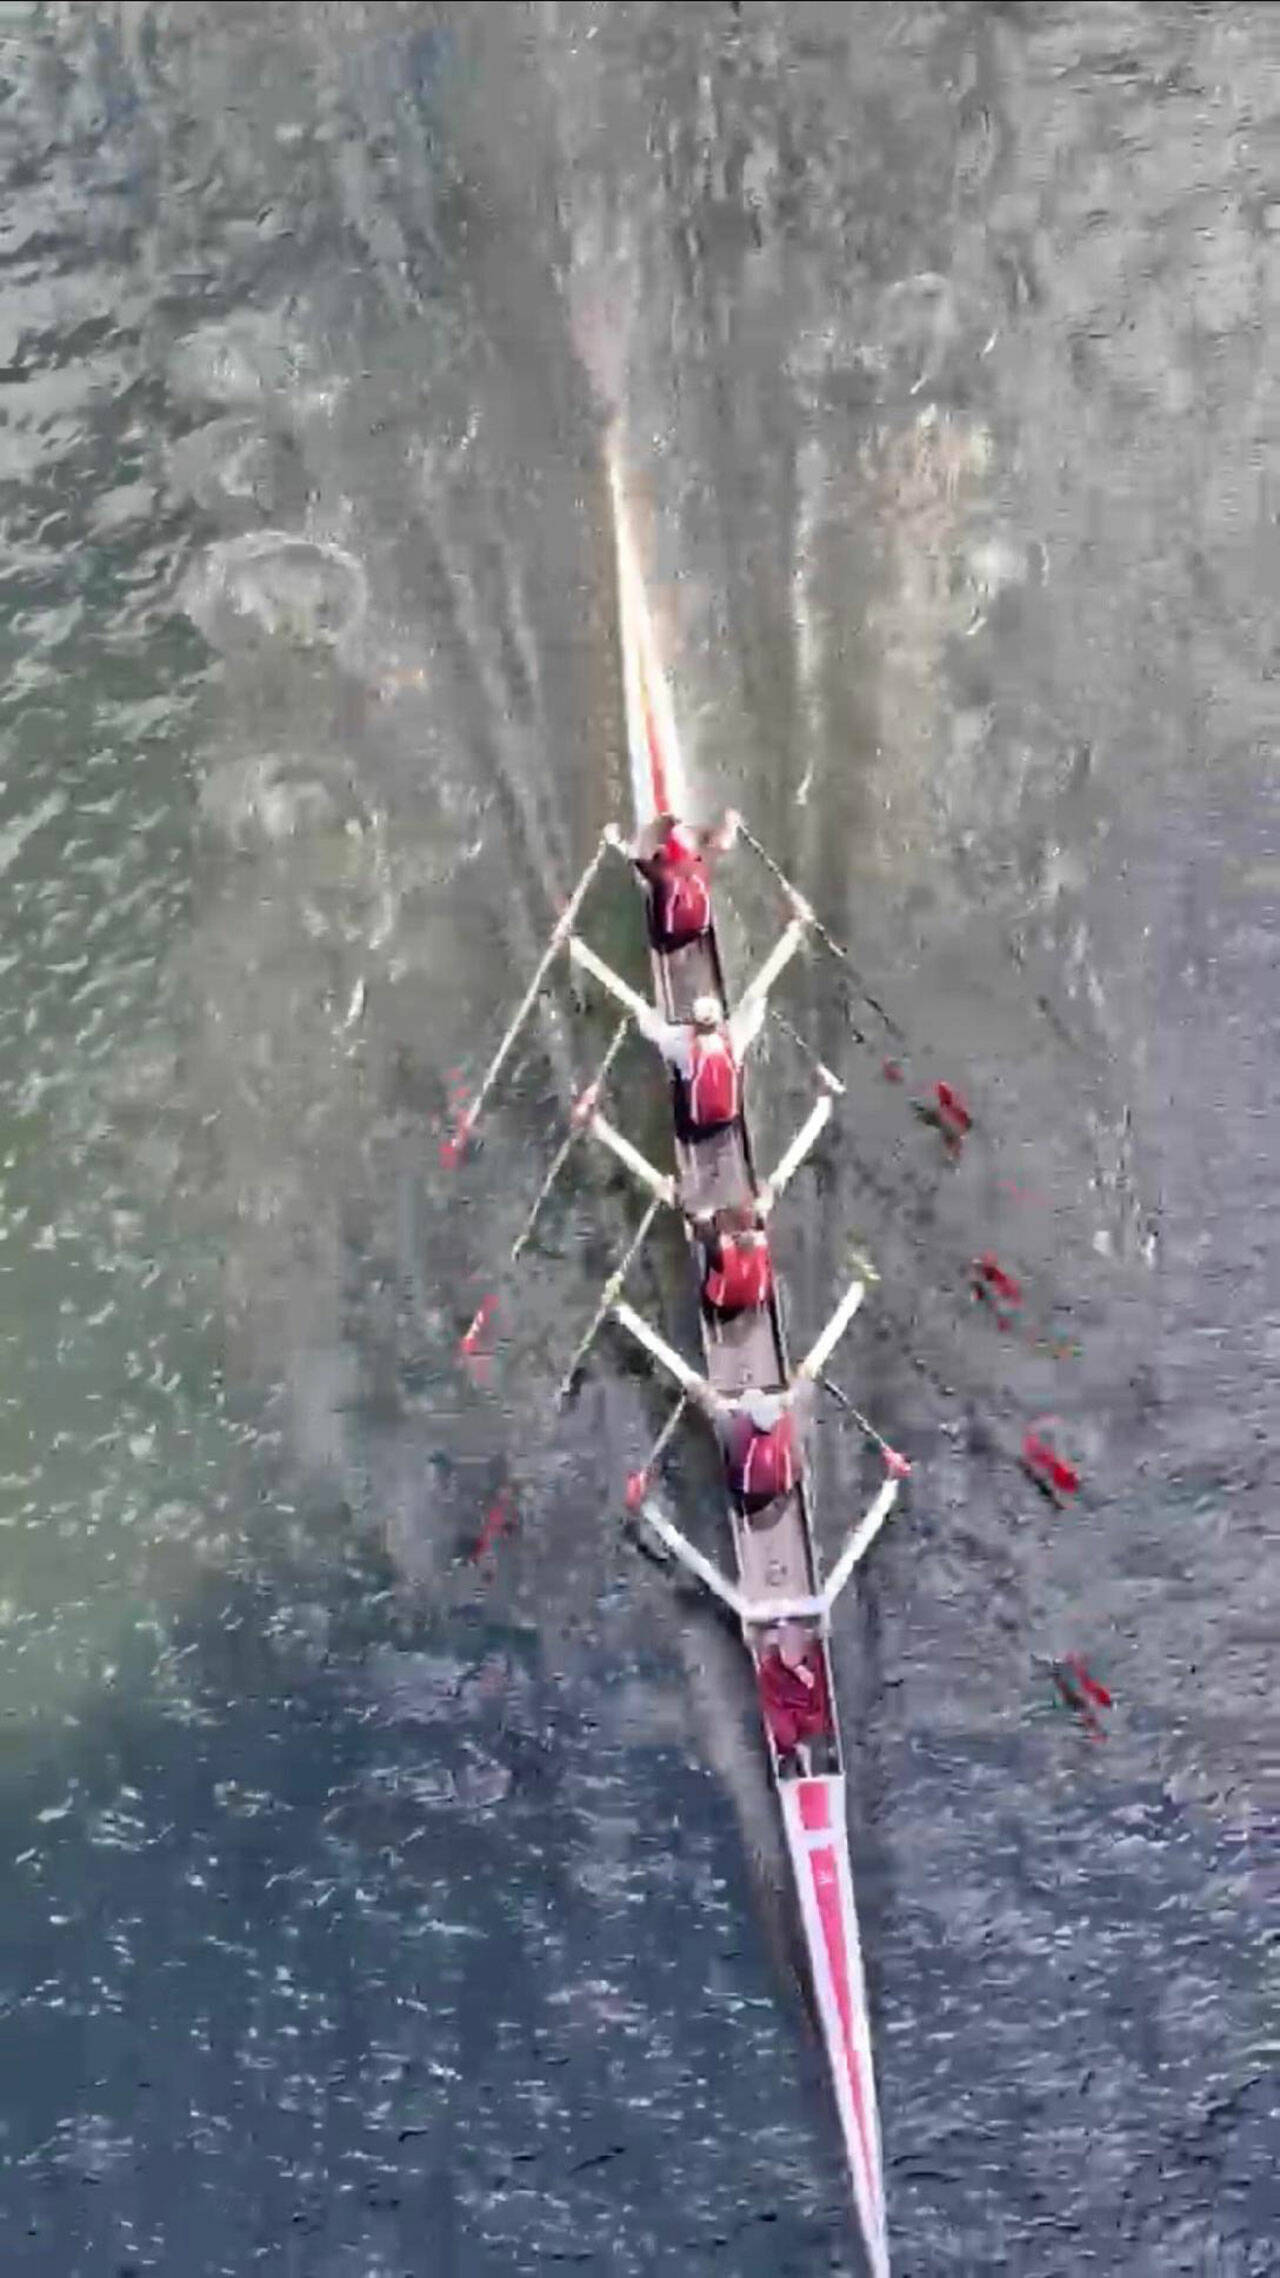 (Richard Parr Photo) Burton Beach Rowing Club rowers, from stern to bow (top to bottom) Zack Merrigan, Davis Kelly, Dylan Carmody, Simon Grant, and Caroline Barnes competed in the Junior Men’s Coxed Quad event at the 2022 Husky Open.